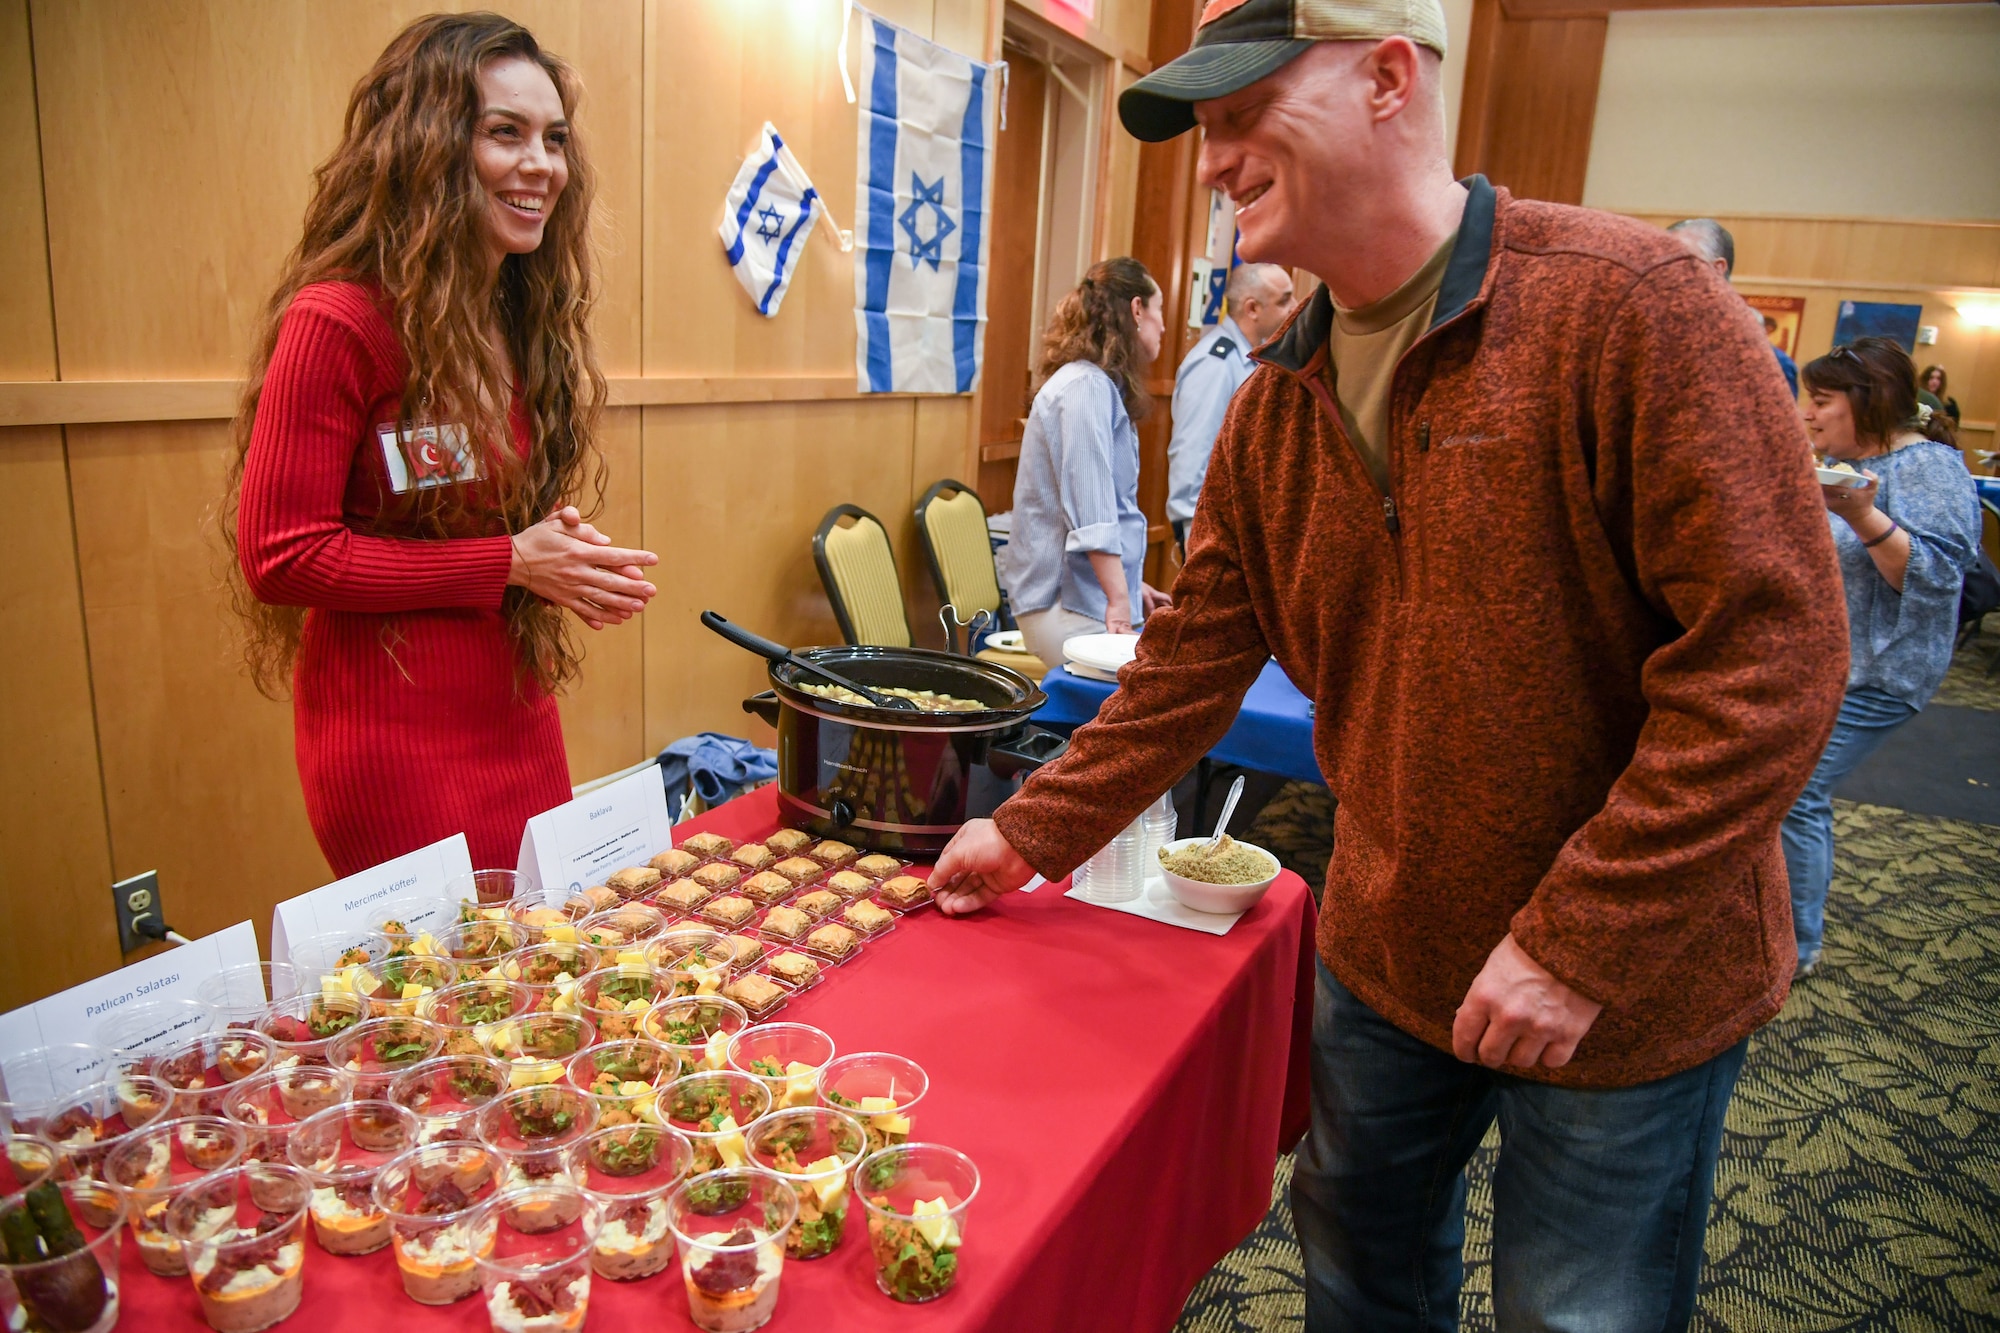 Nurdina Senay, from Turkey, talks about her dishes at the International Culinary Tasting Buffet March 4, 2020, at Hill Air Force Base, Utah. The event was hosted by the Hill AFB foreign liaison officers and featured food, drinks, and cultural education from 15 different countries. (U.S. Air Force photo by Cynthia Griggs)